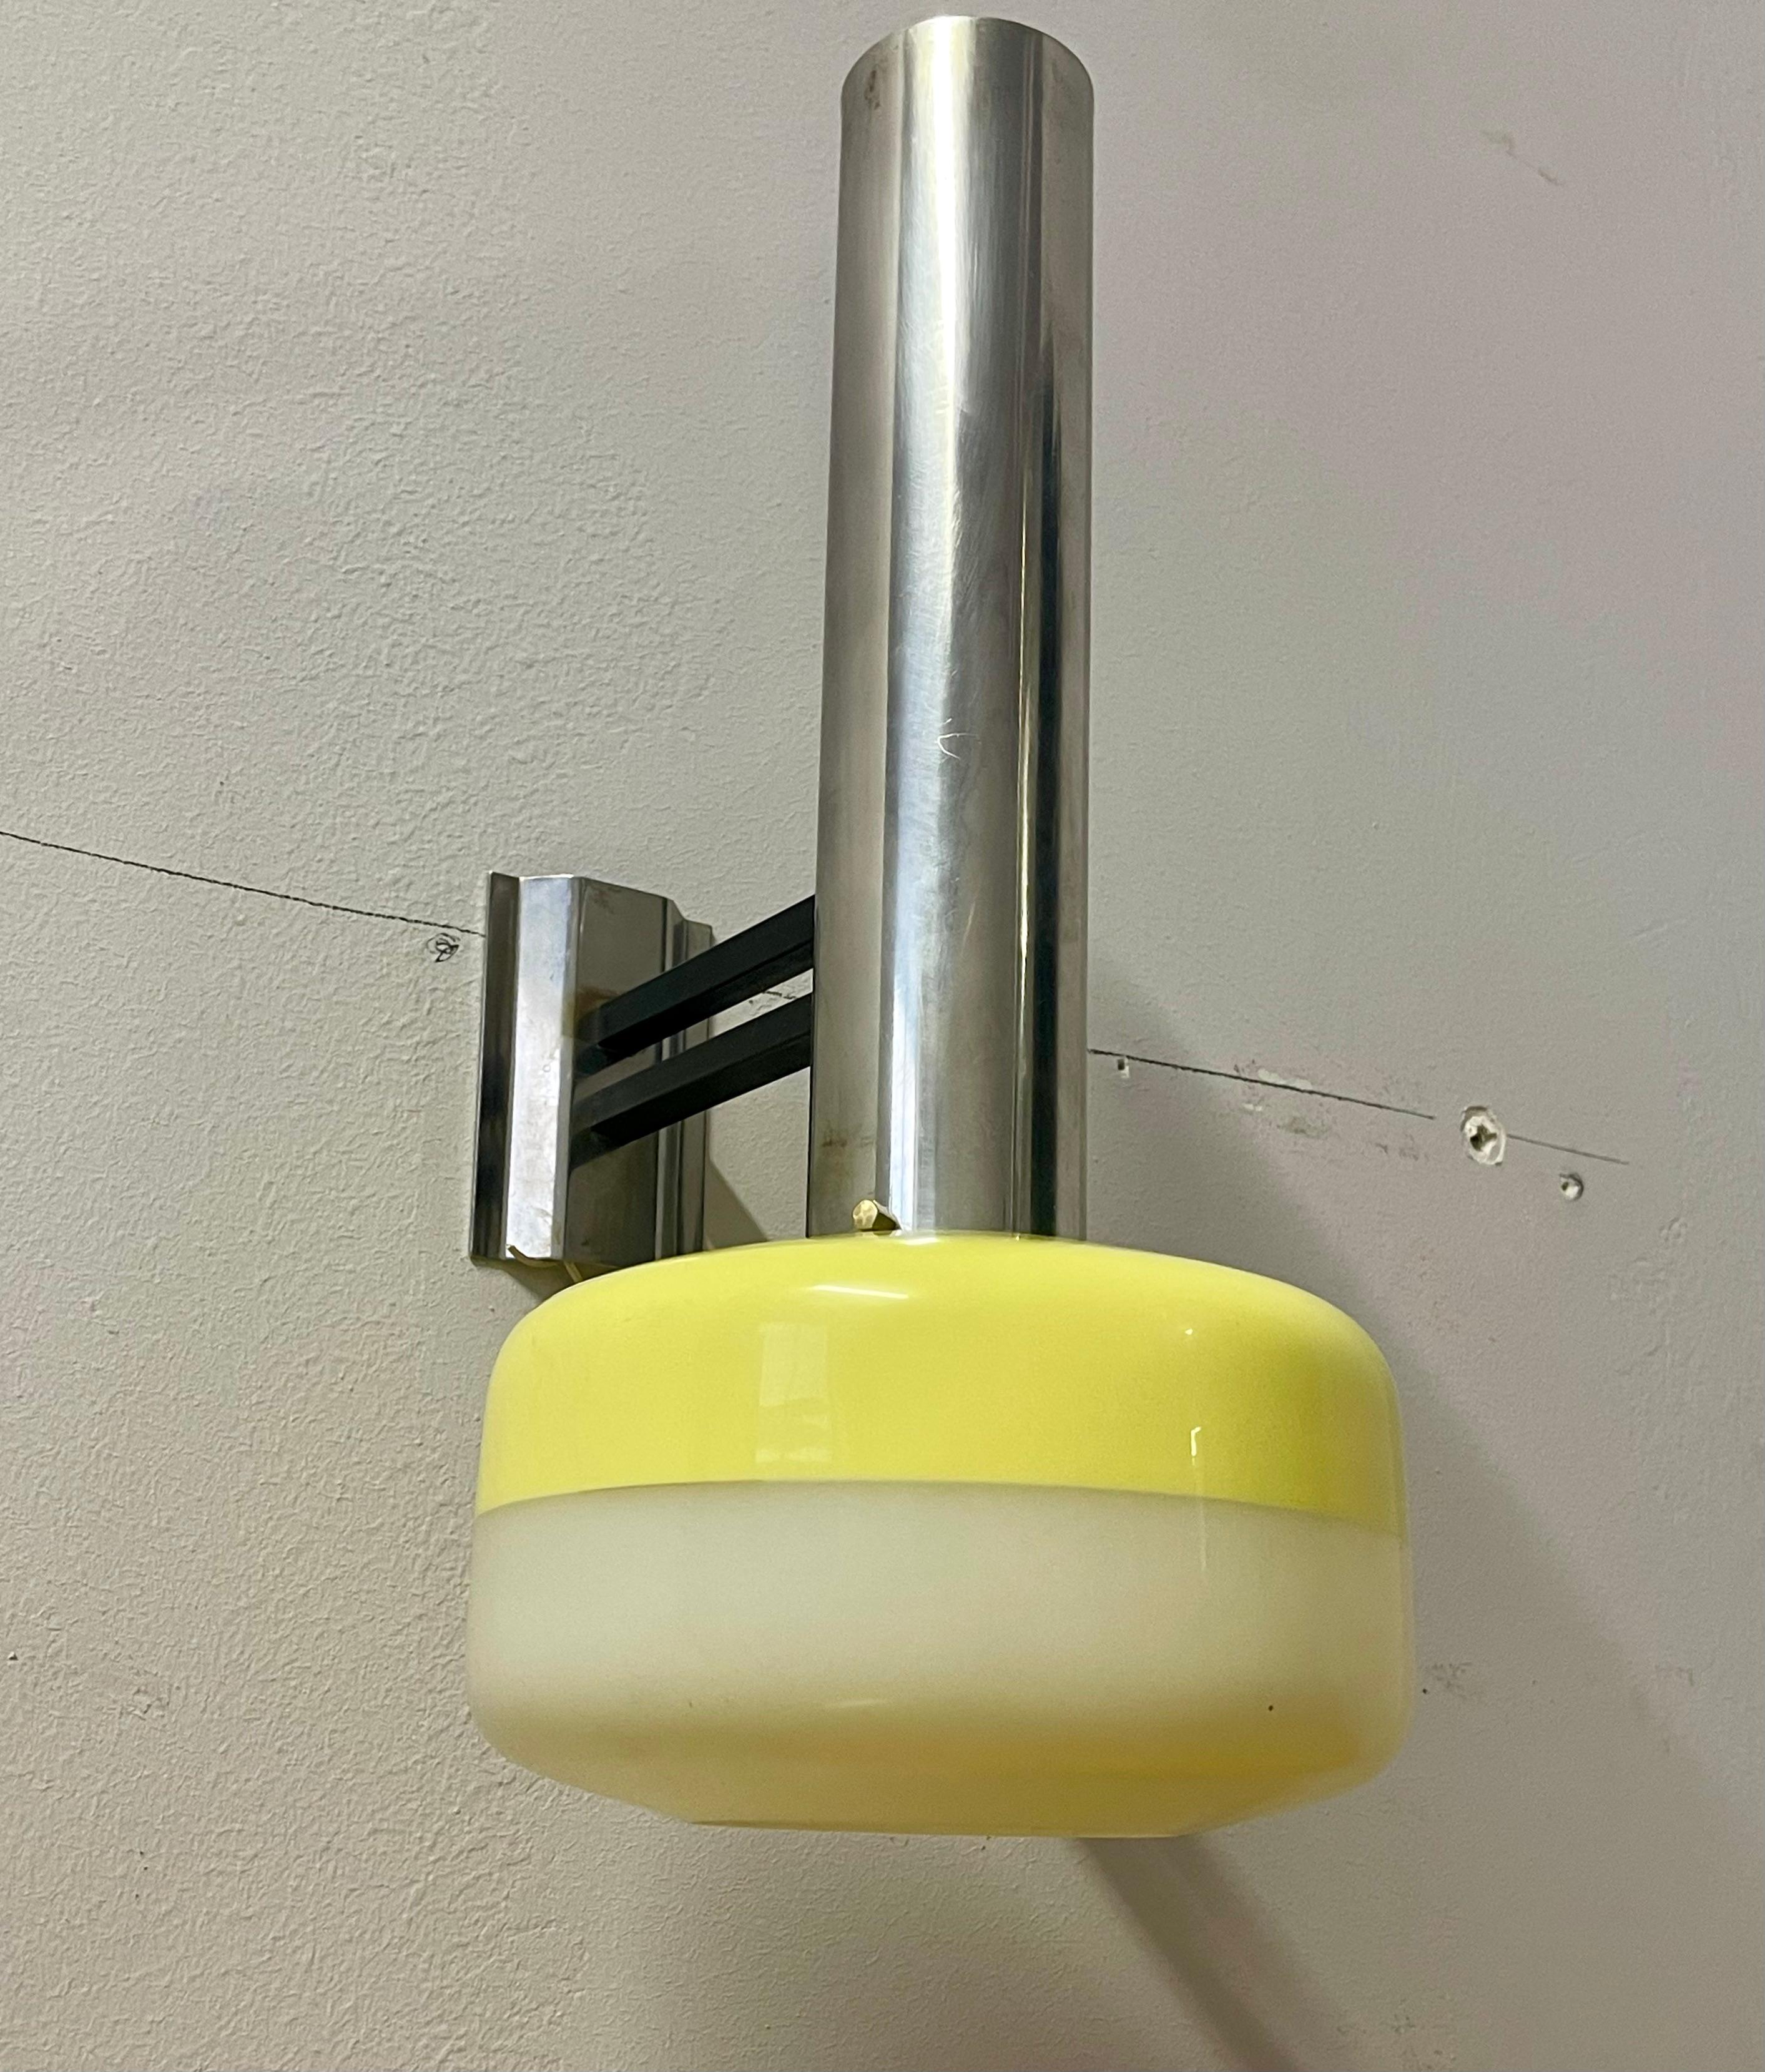 Very rare wall sconce, model 2108, designed and produced by Stilnovo, Italy 1960. This lamp has a polished aluminum tubular frame with perspex diffuser in white and soft yellow colors. factory label on the back.
Edit description